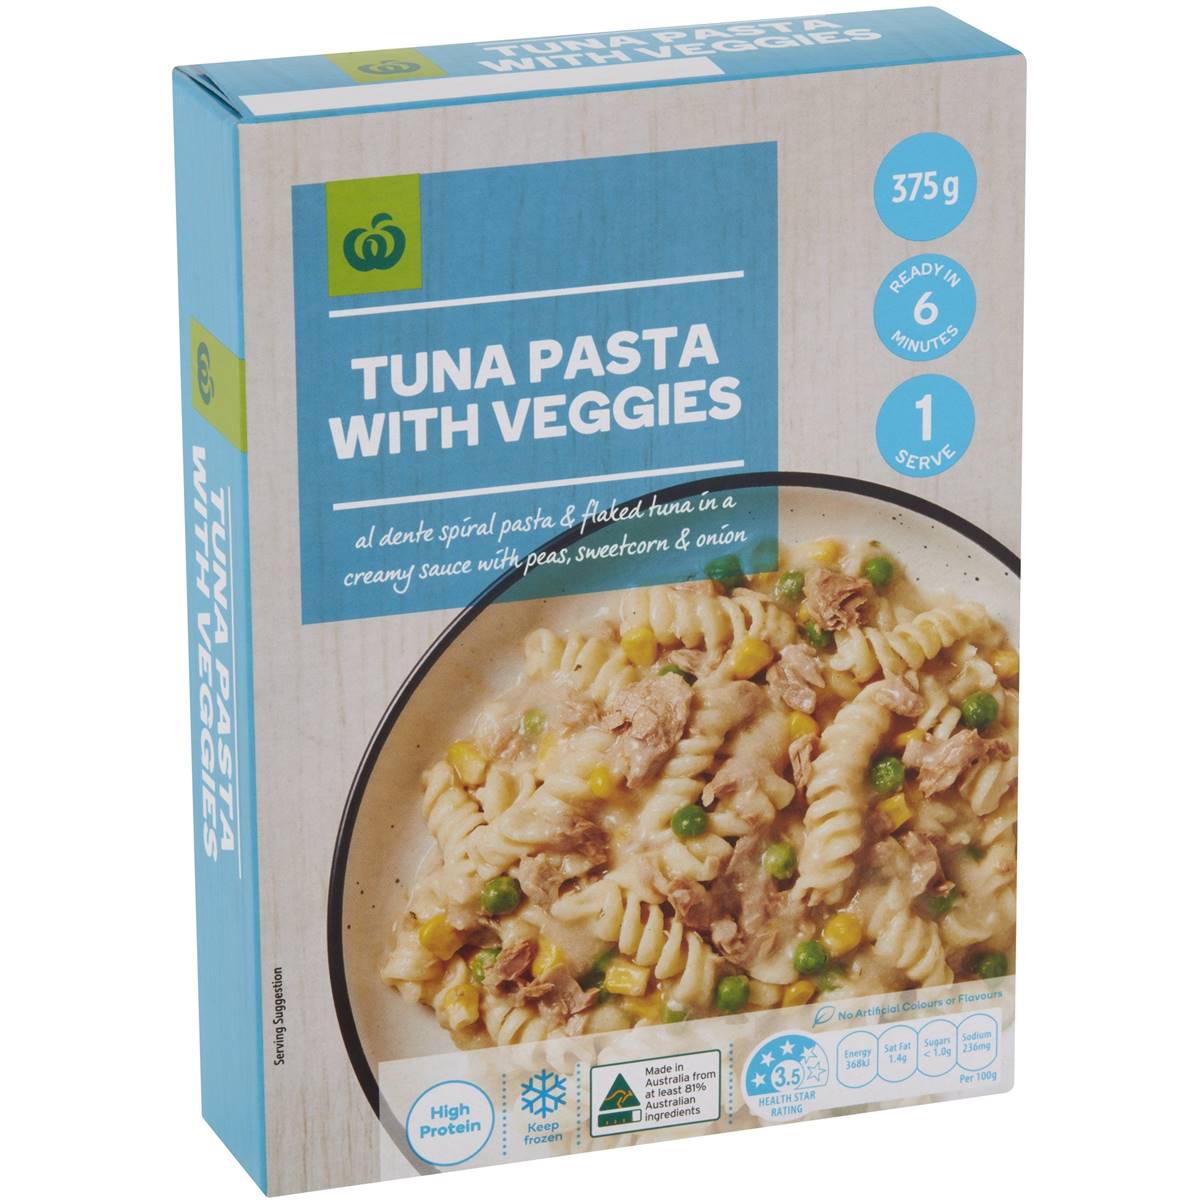 Calories in Woolworths Tuna Pasta With Veggies